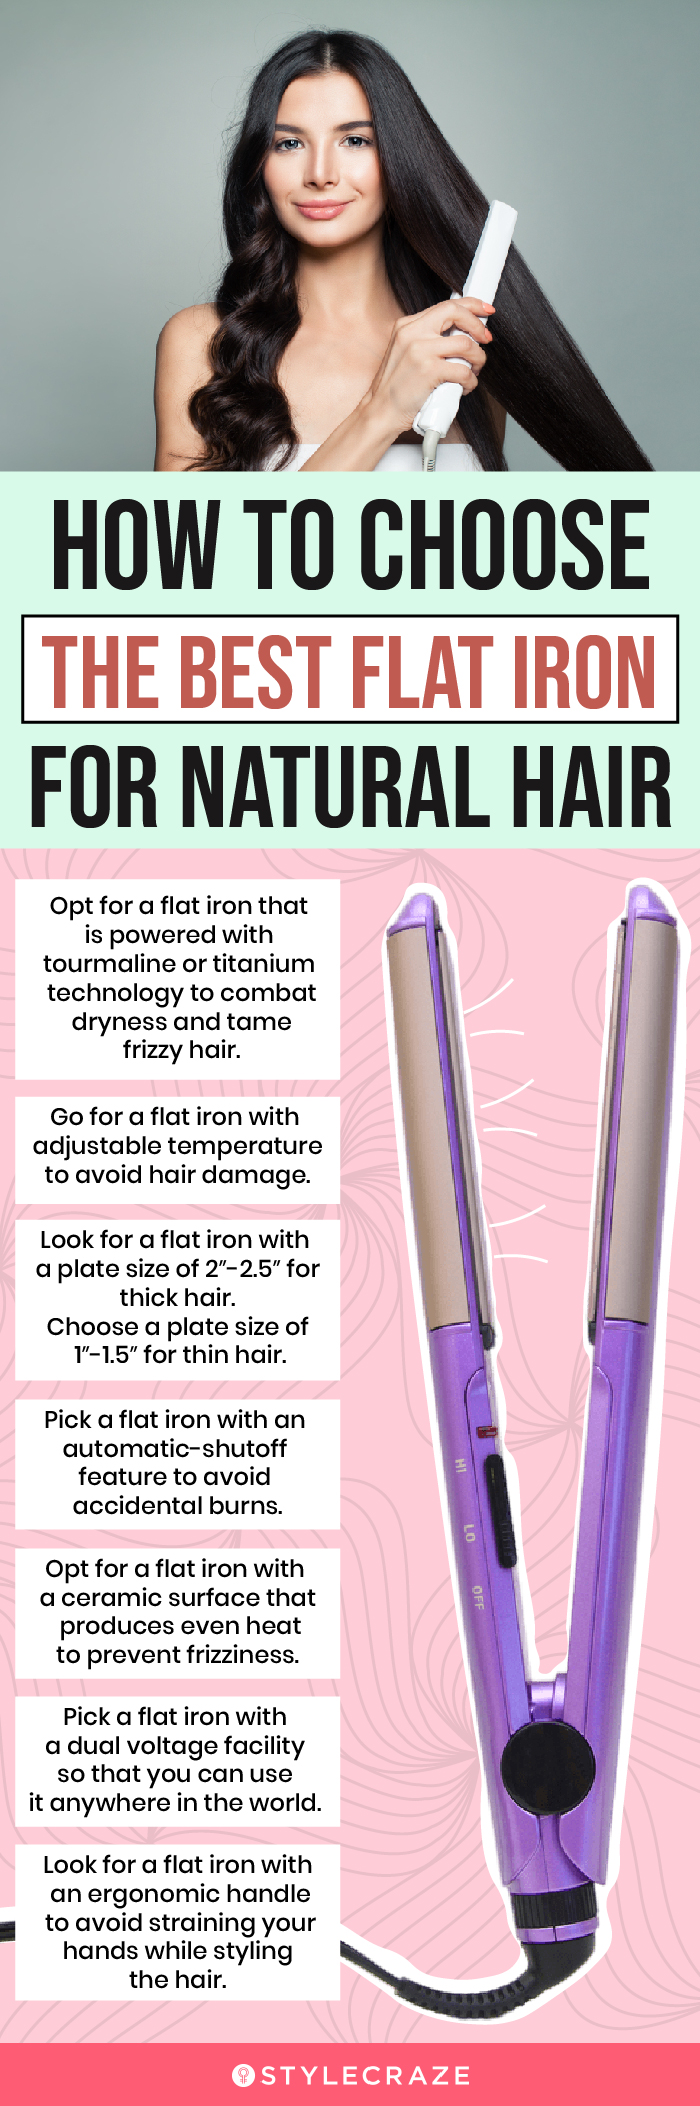 How To Choose The Best Flat Iron For Natural Hair (infographic)